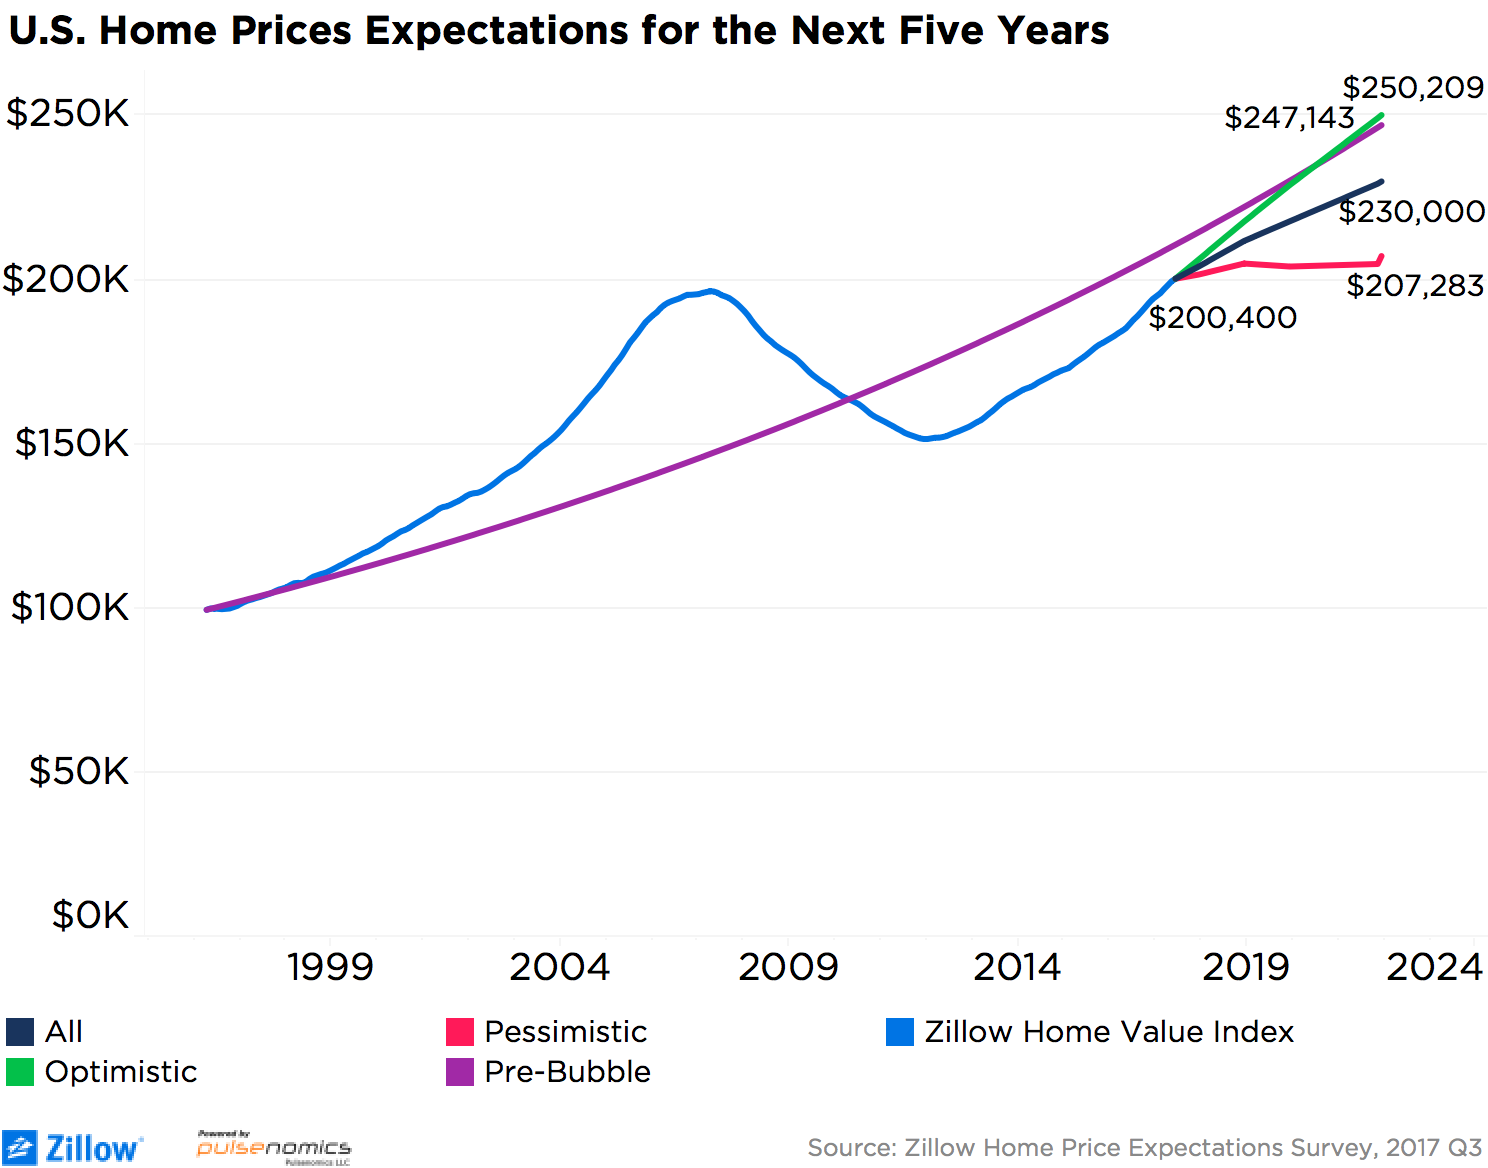 Zillow's Home Prices Expectations